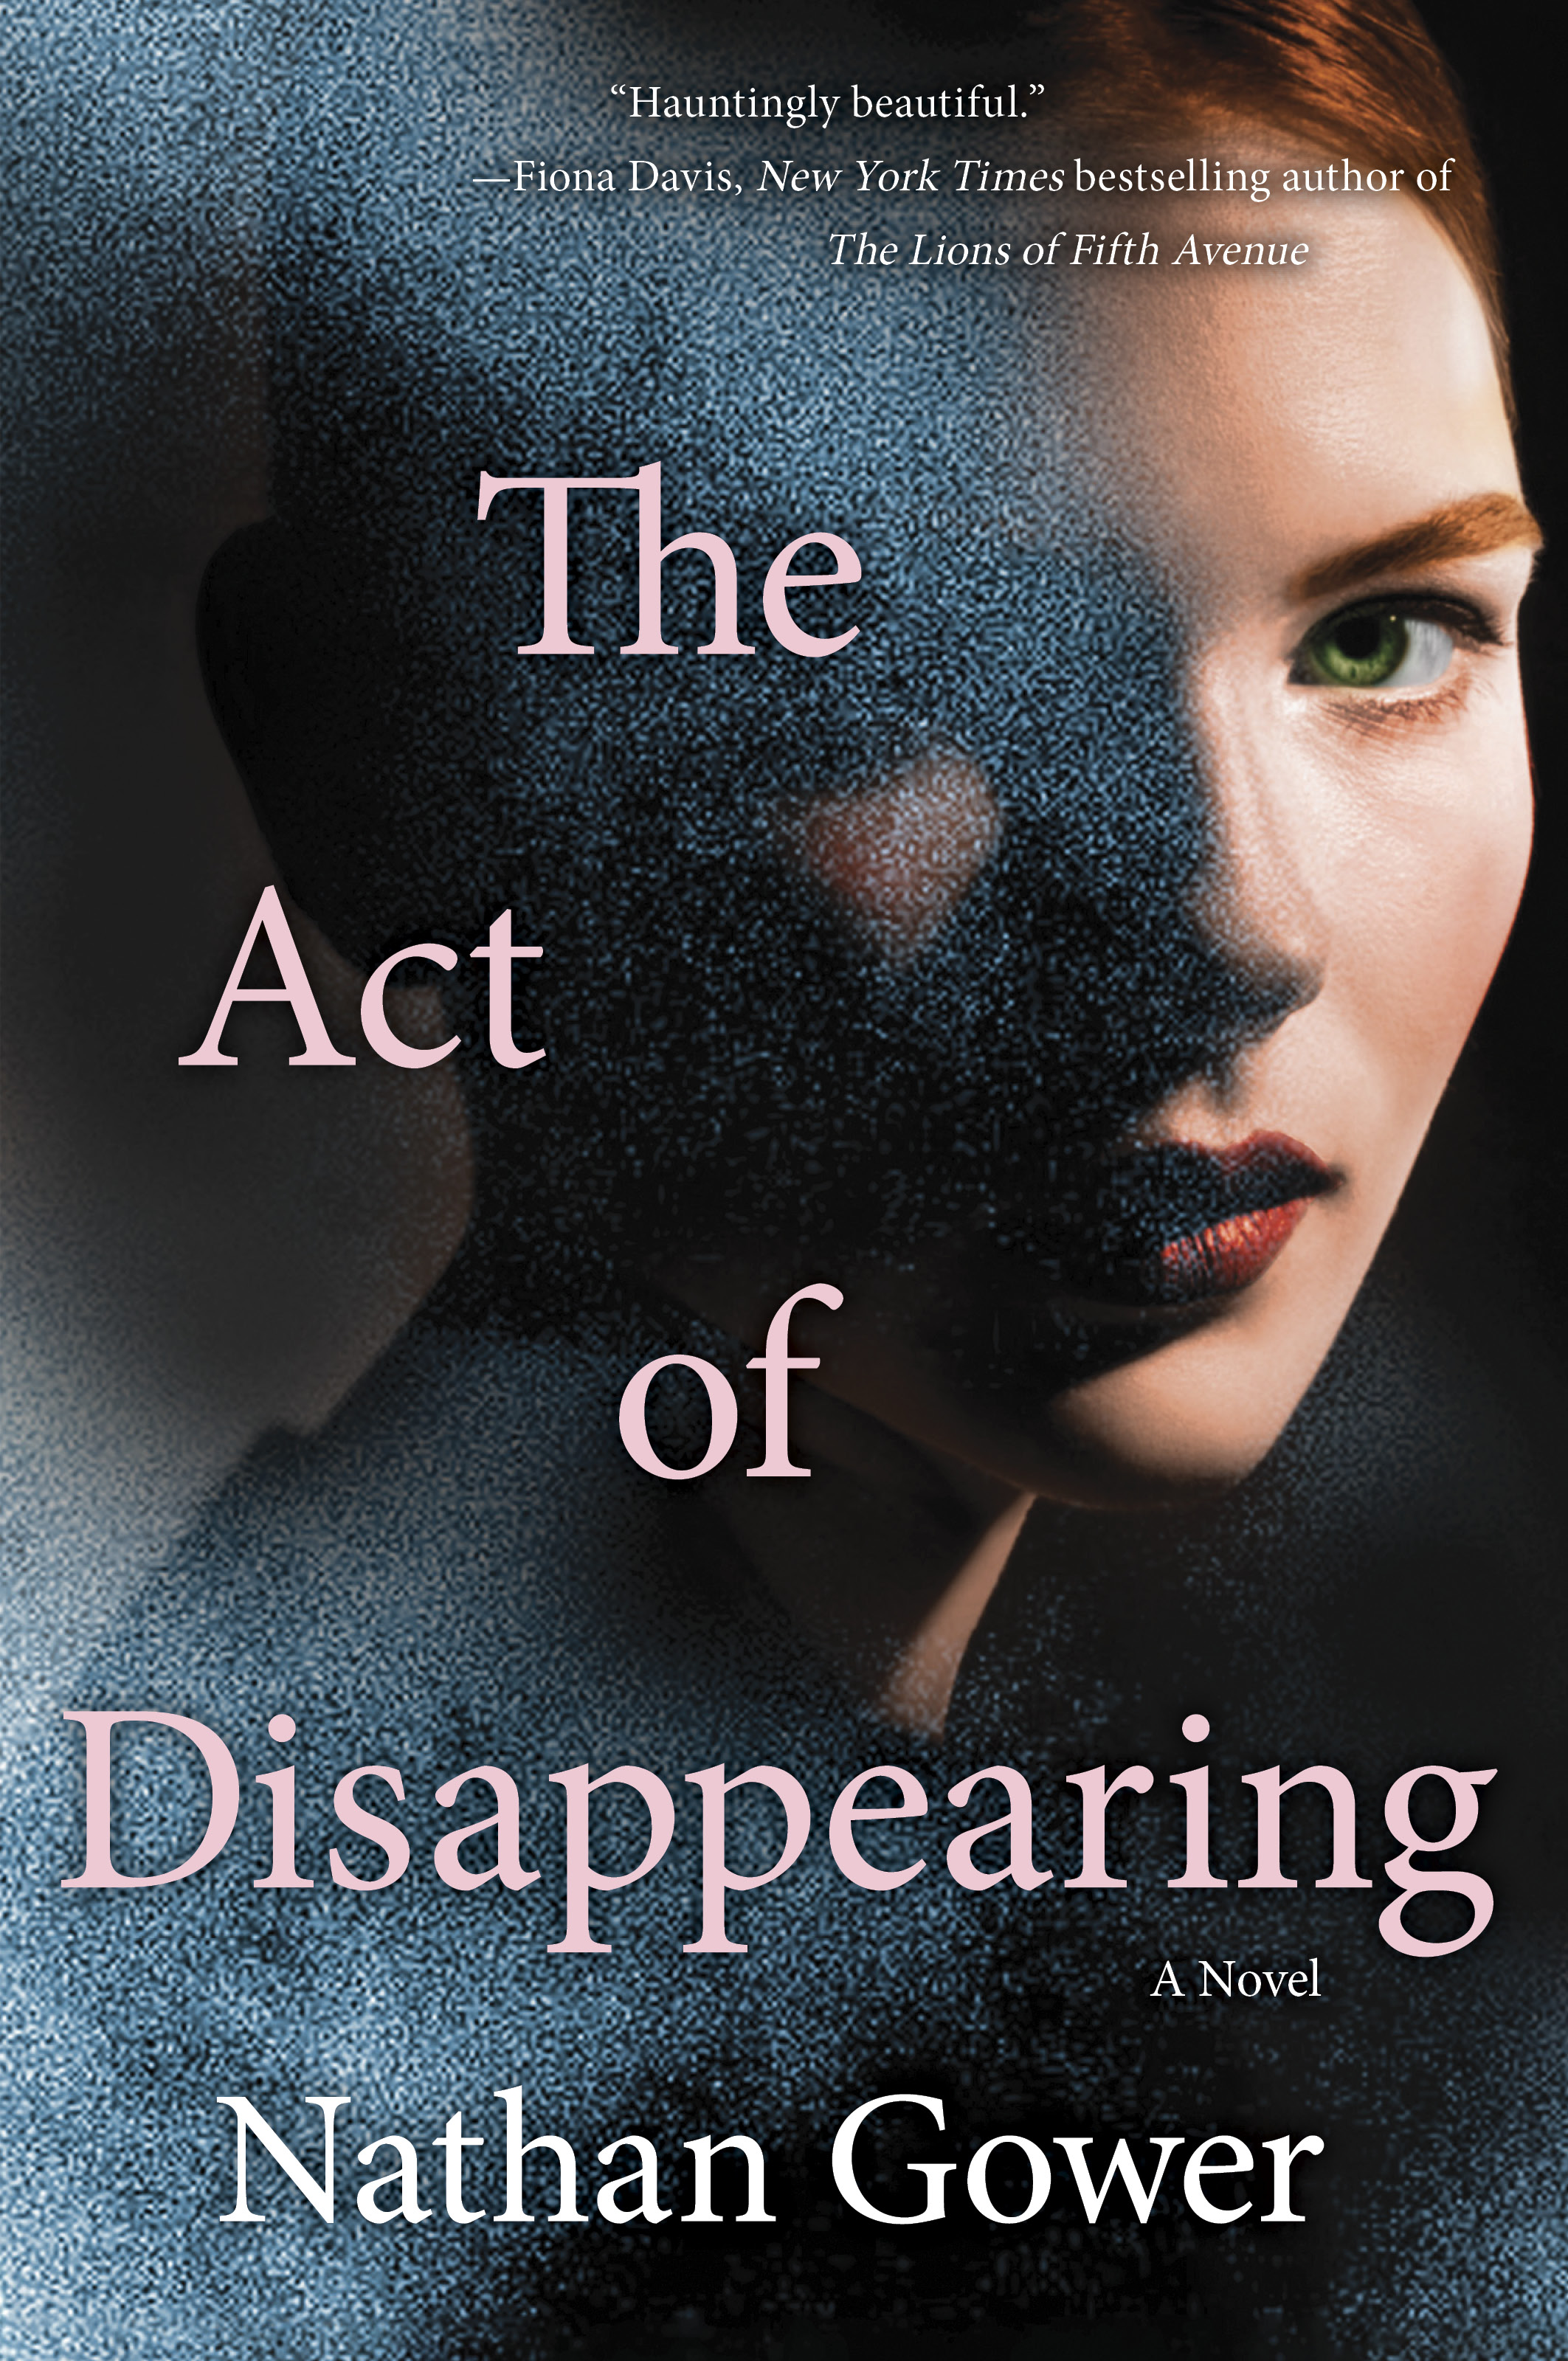 Book cover - The Act of Disappearing by Nathan Gower